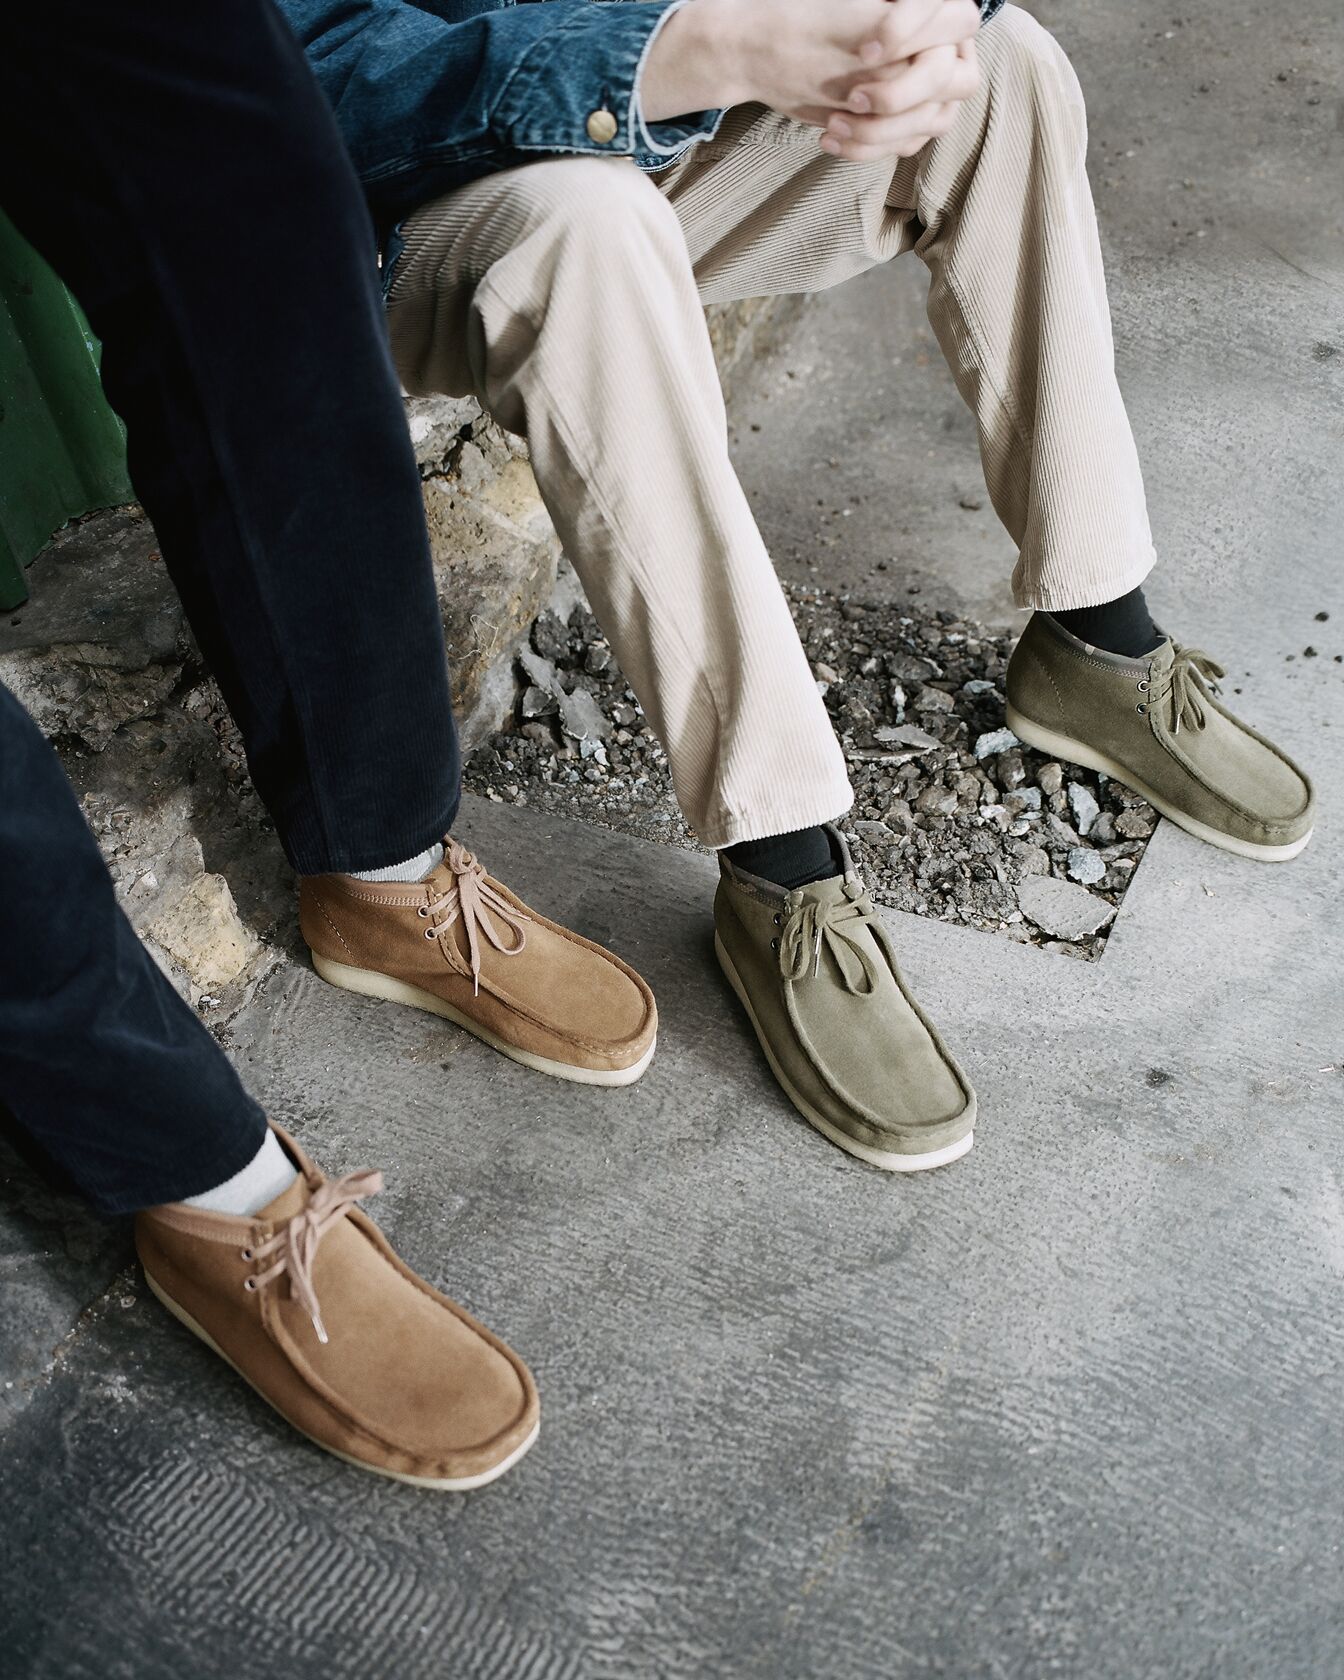 Clarks & Carhartt WIP Reimagines The Iconic Clarks Wallabee – PAUSE